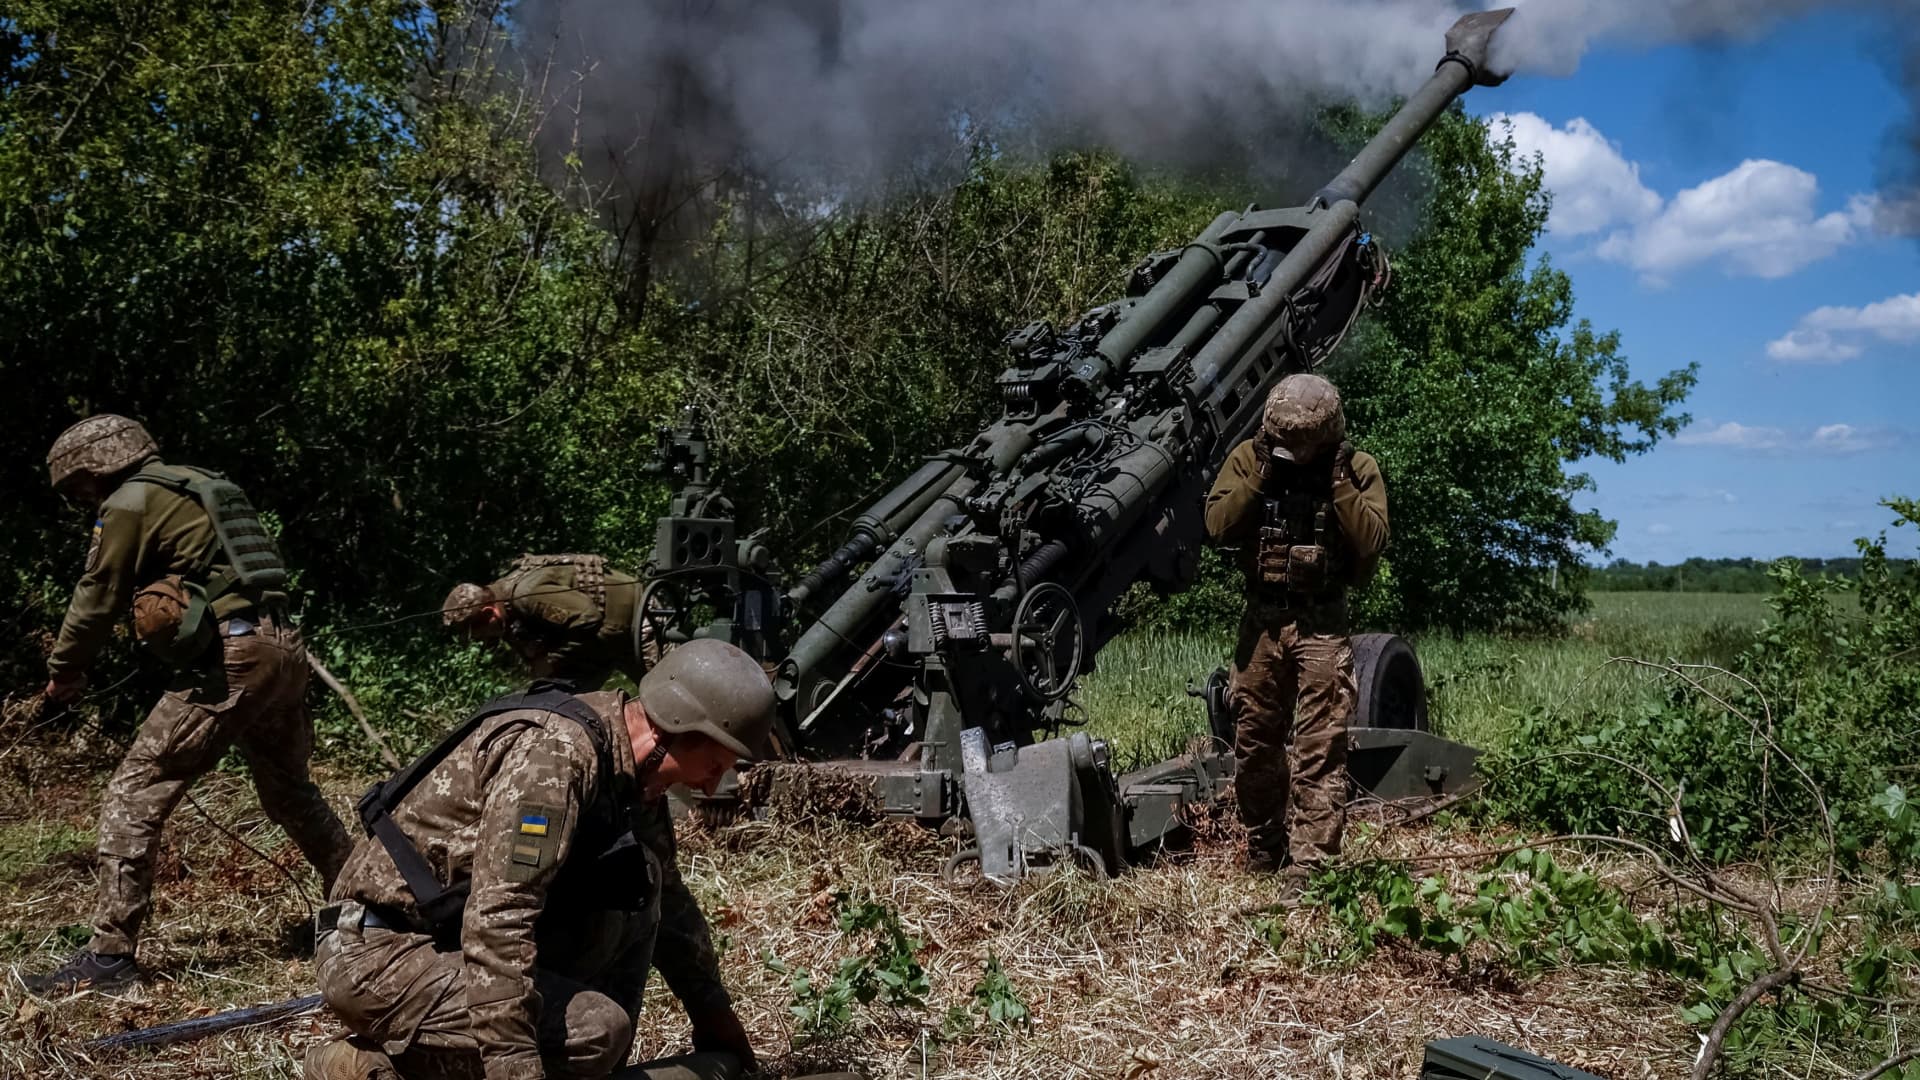 Ukrainian service members fire a shell from a M777 Howitzer near a frontline, as Russia's attack on Ukraine continues, in Donetsk Region, Ukraine June 6, 2022.